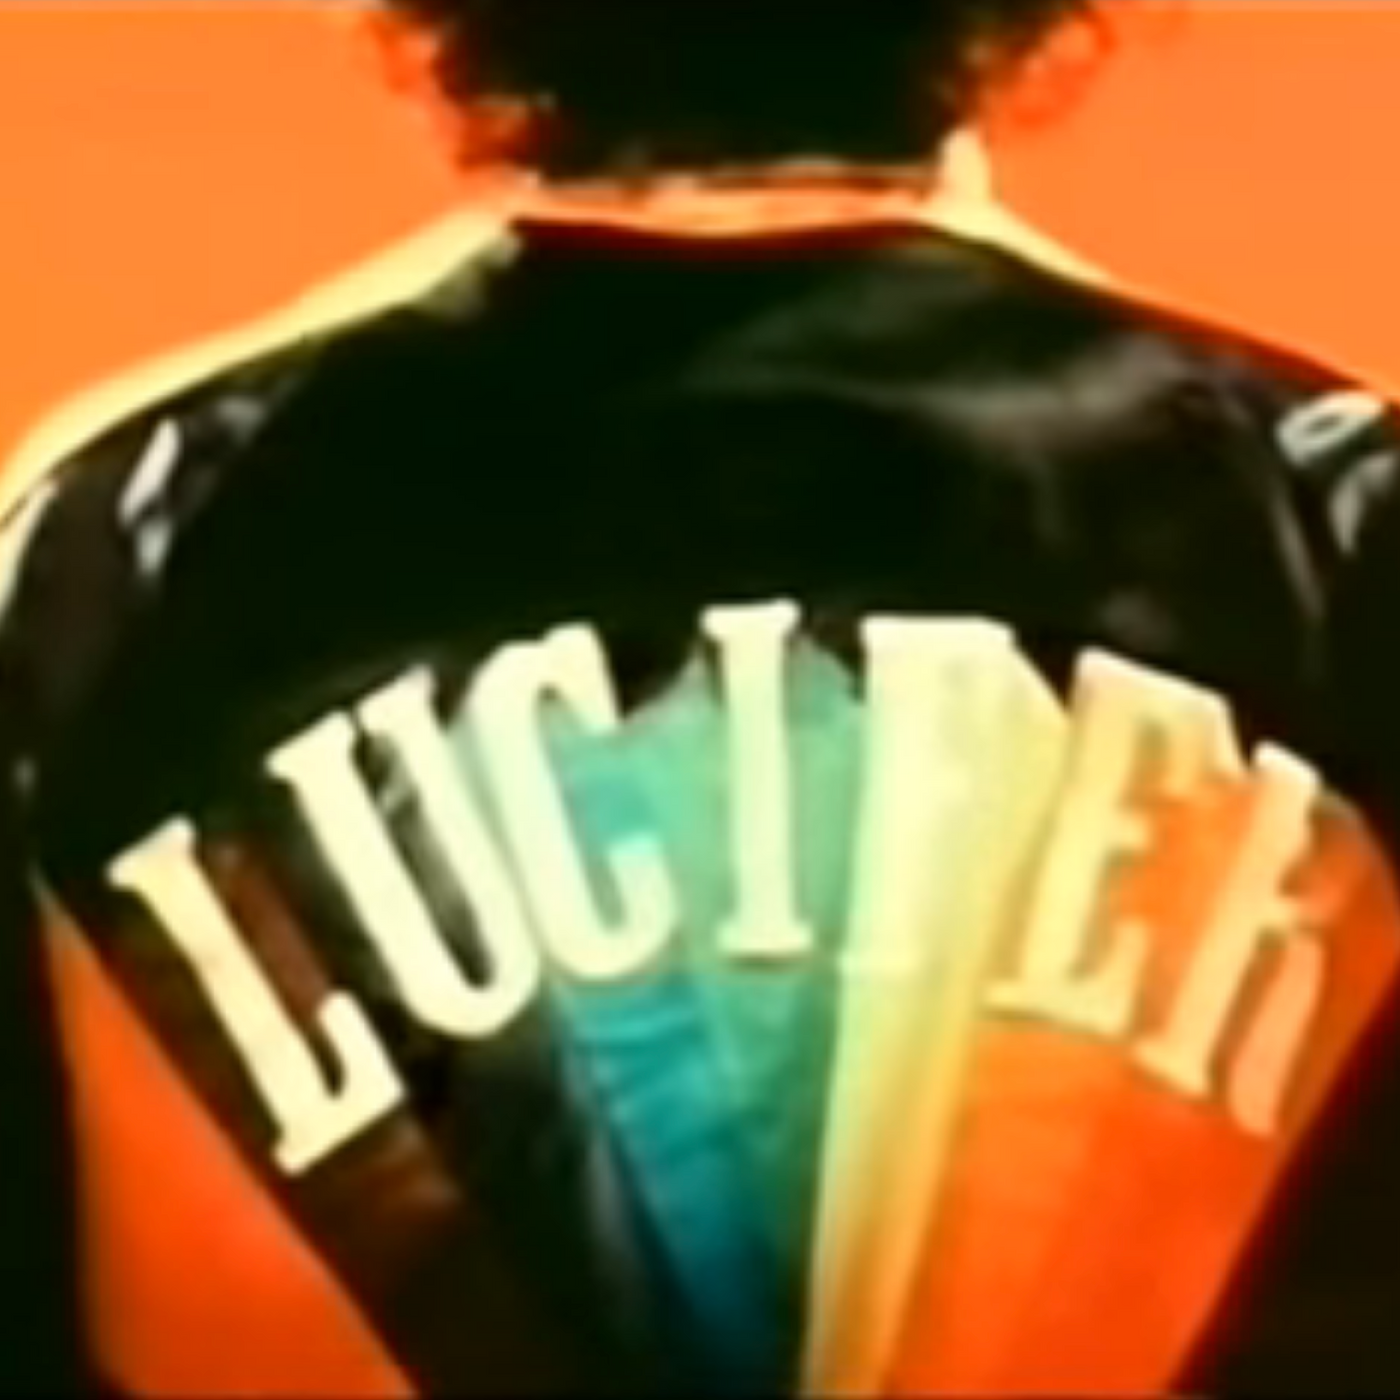 Watch Kenneth Anger's Short Films on YouTube